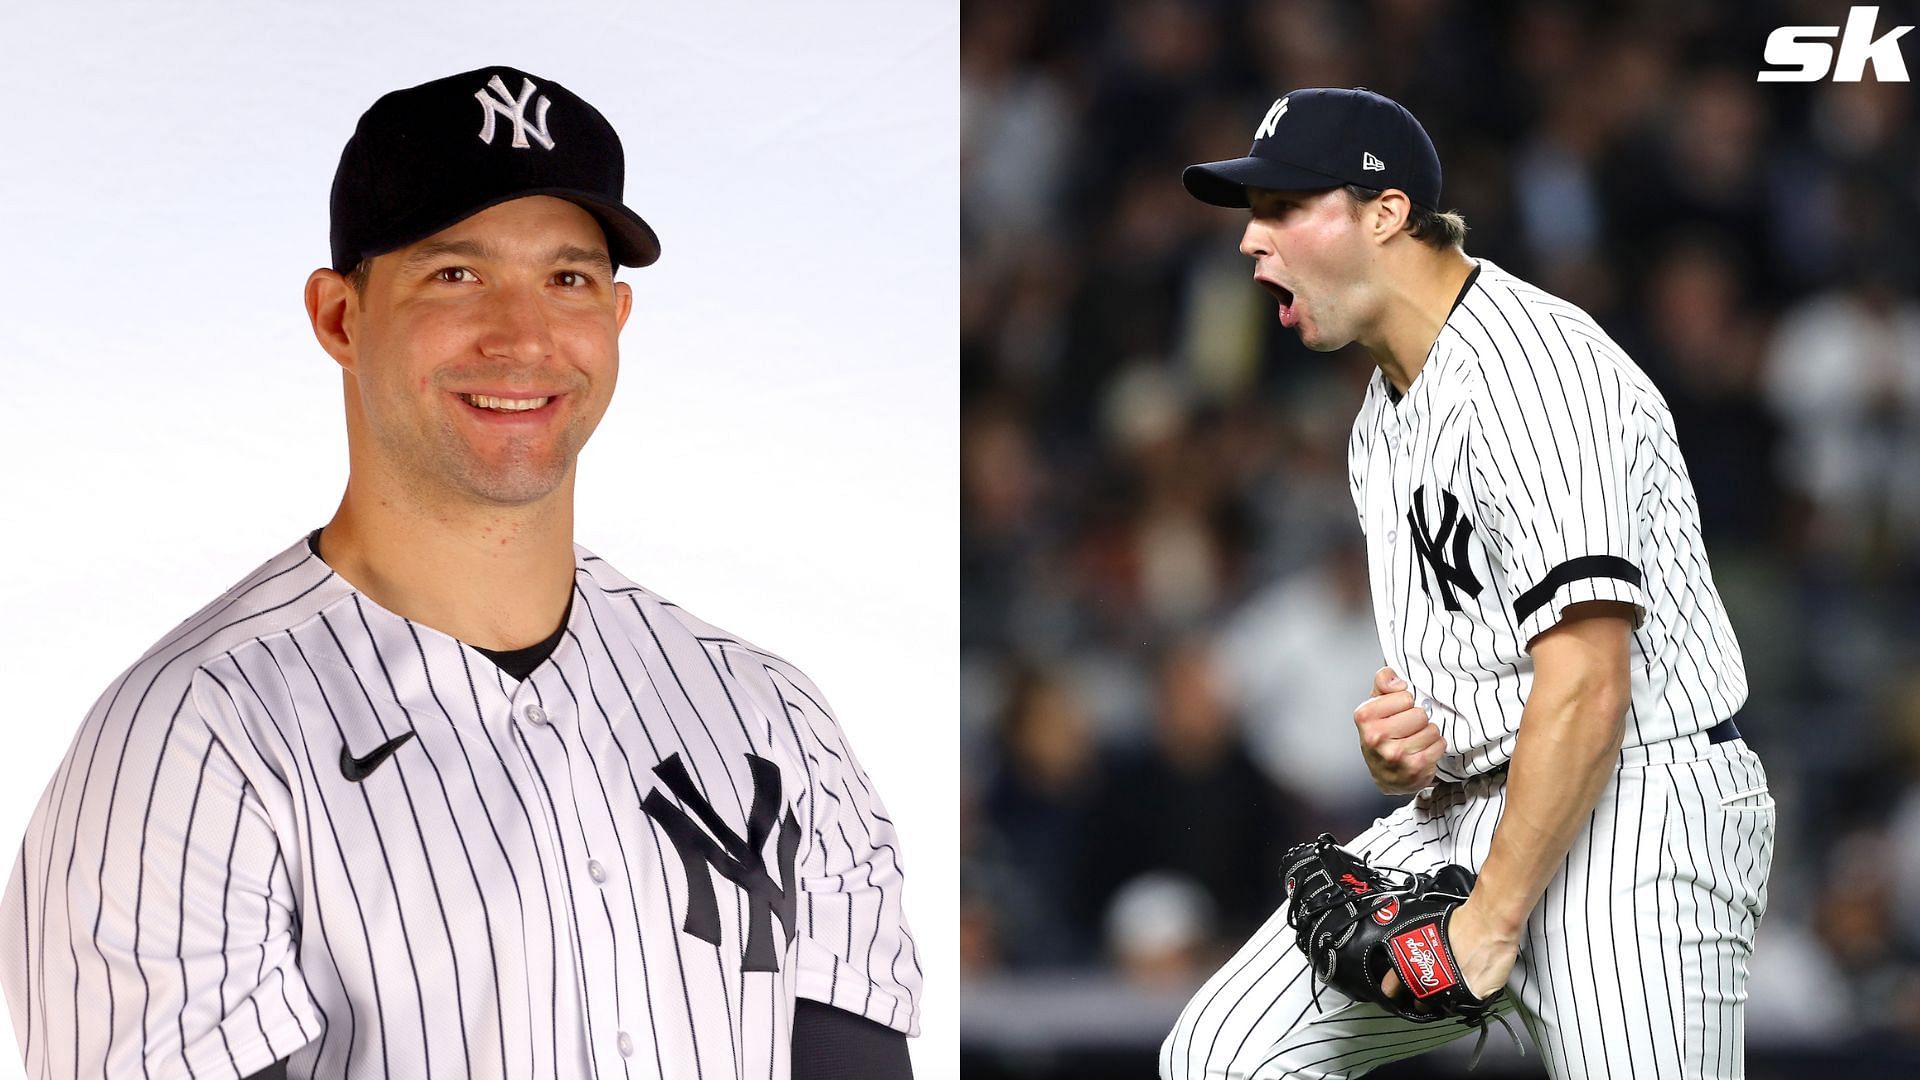 New York Yankees' $11,500,000 pitcher Tommy Kahnle elaborates on absurd  post-game shaving ritual